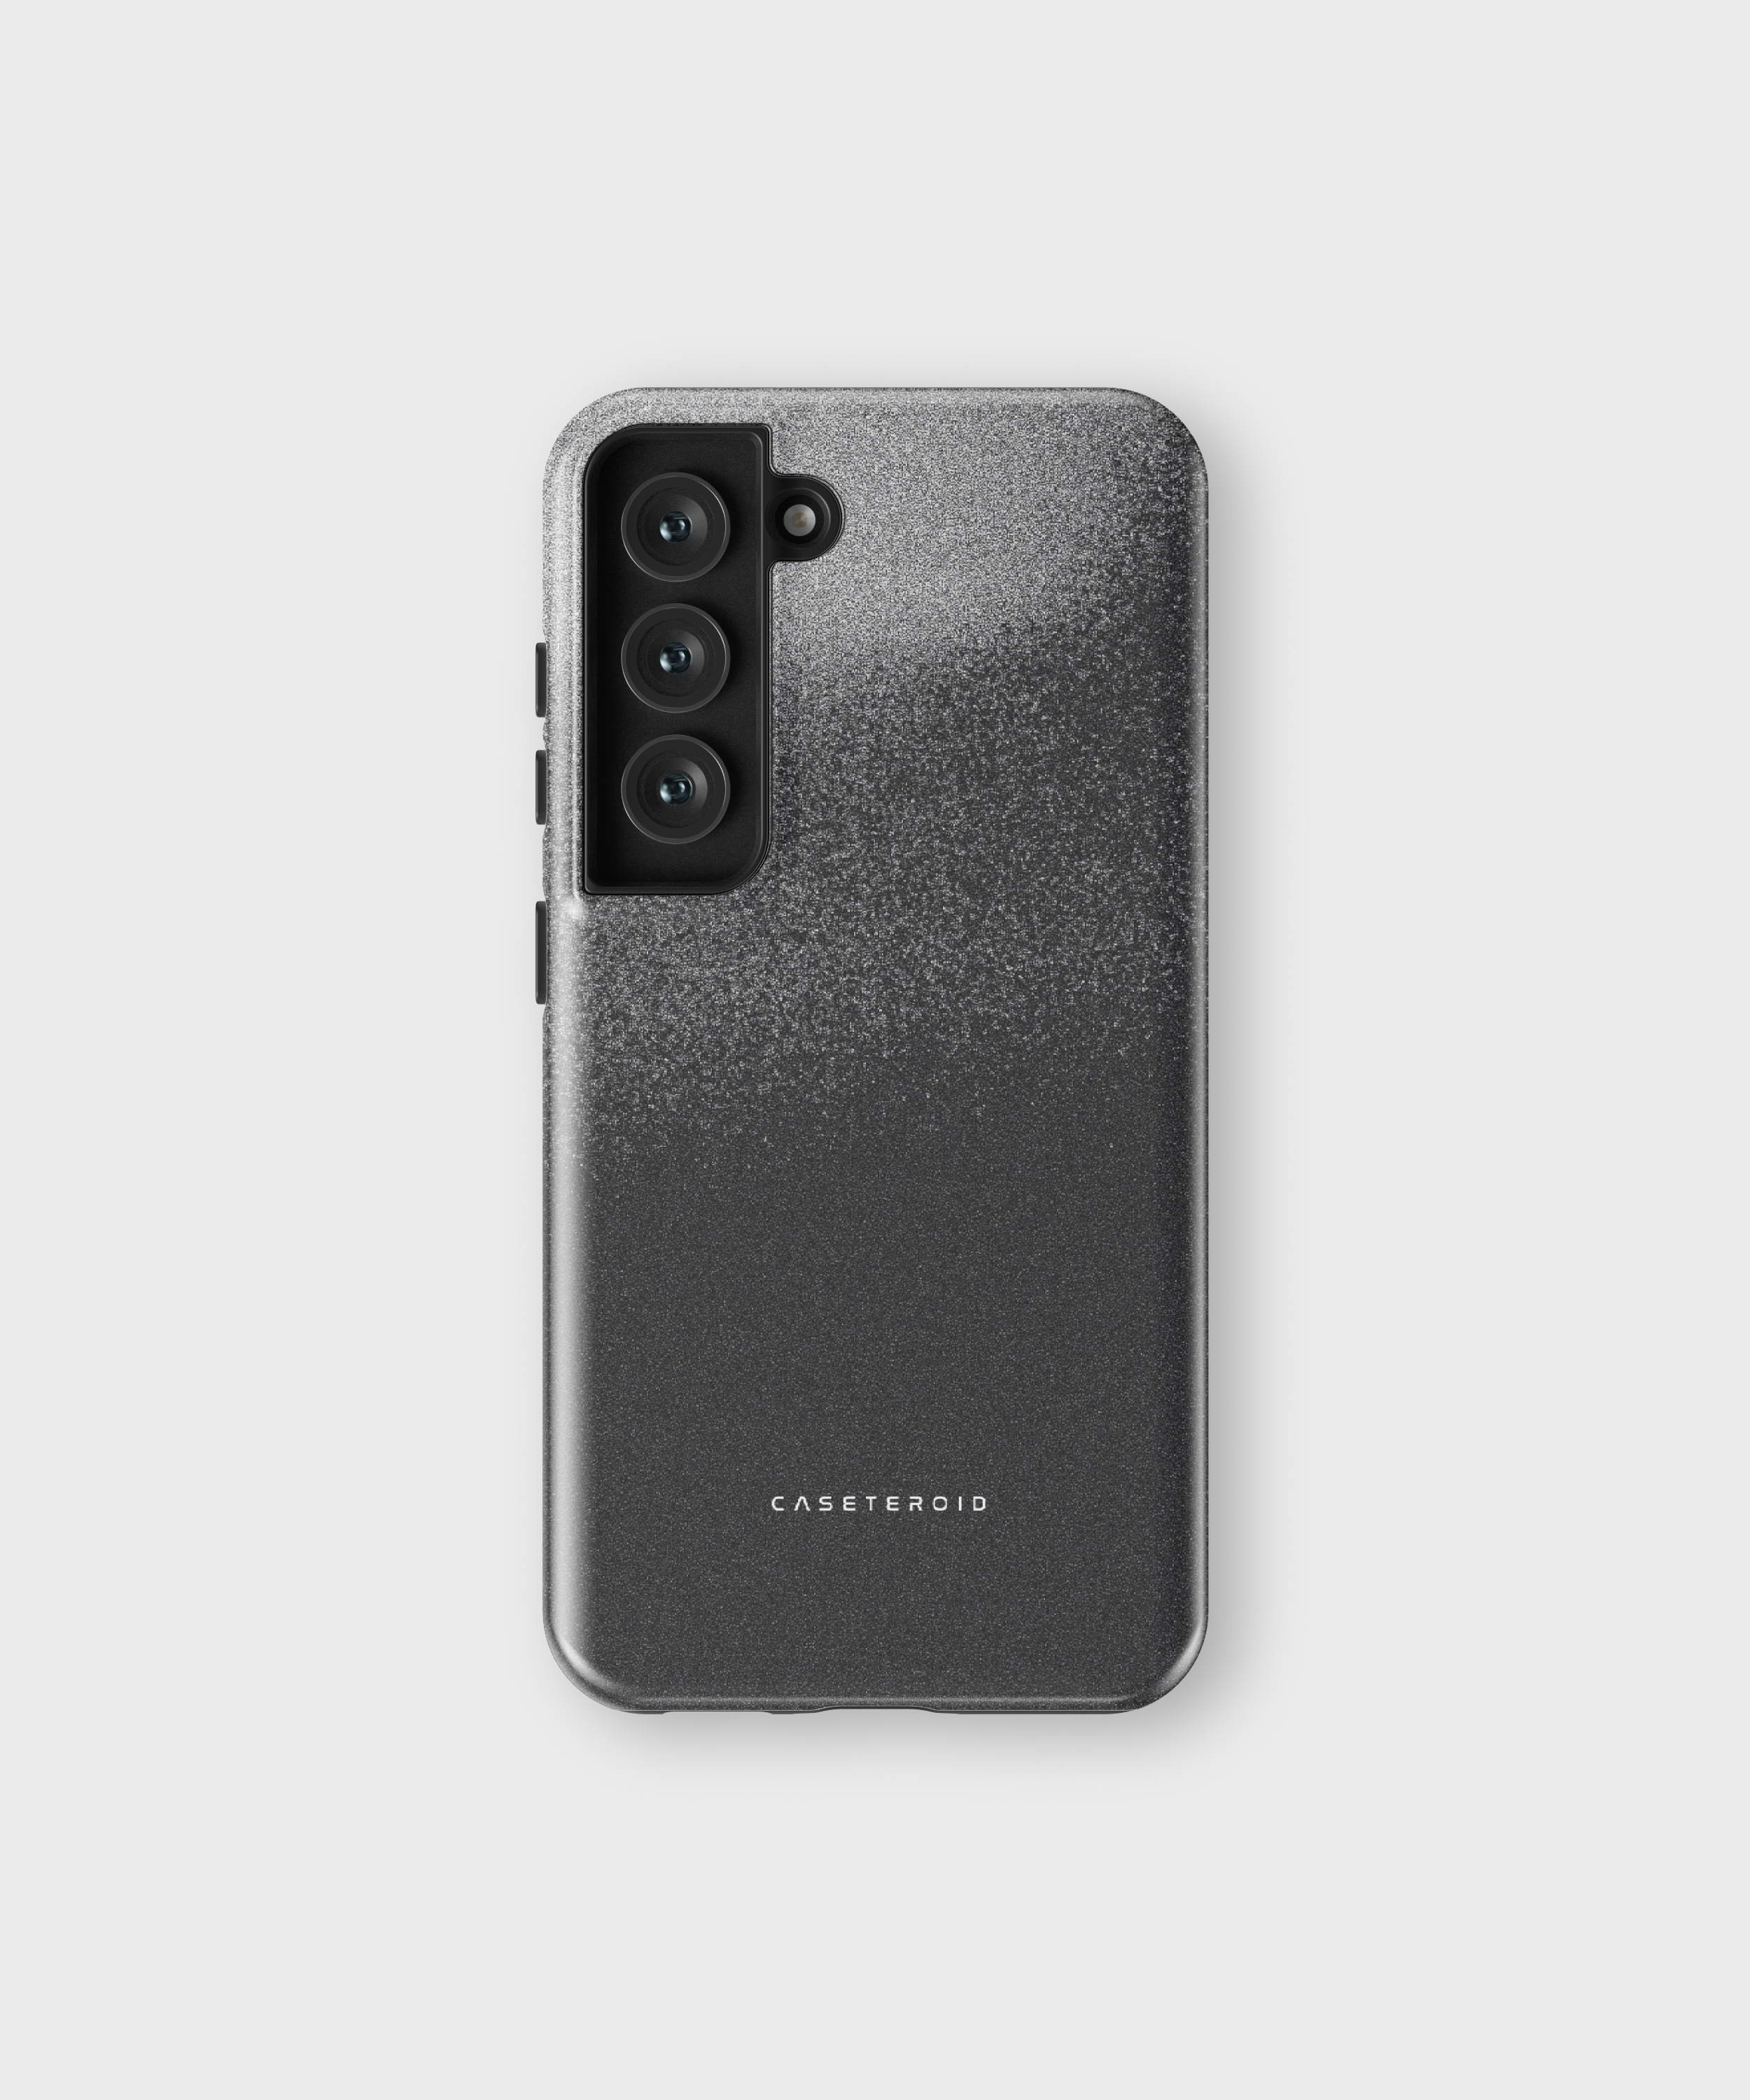 Samsung Tough Case - Starry Froth - CASETEROID